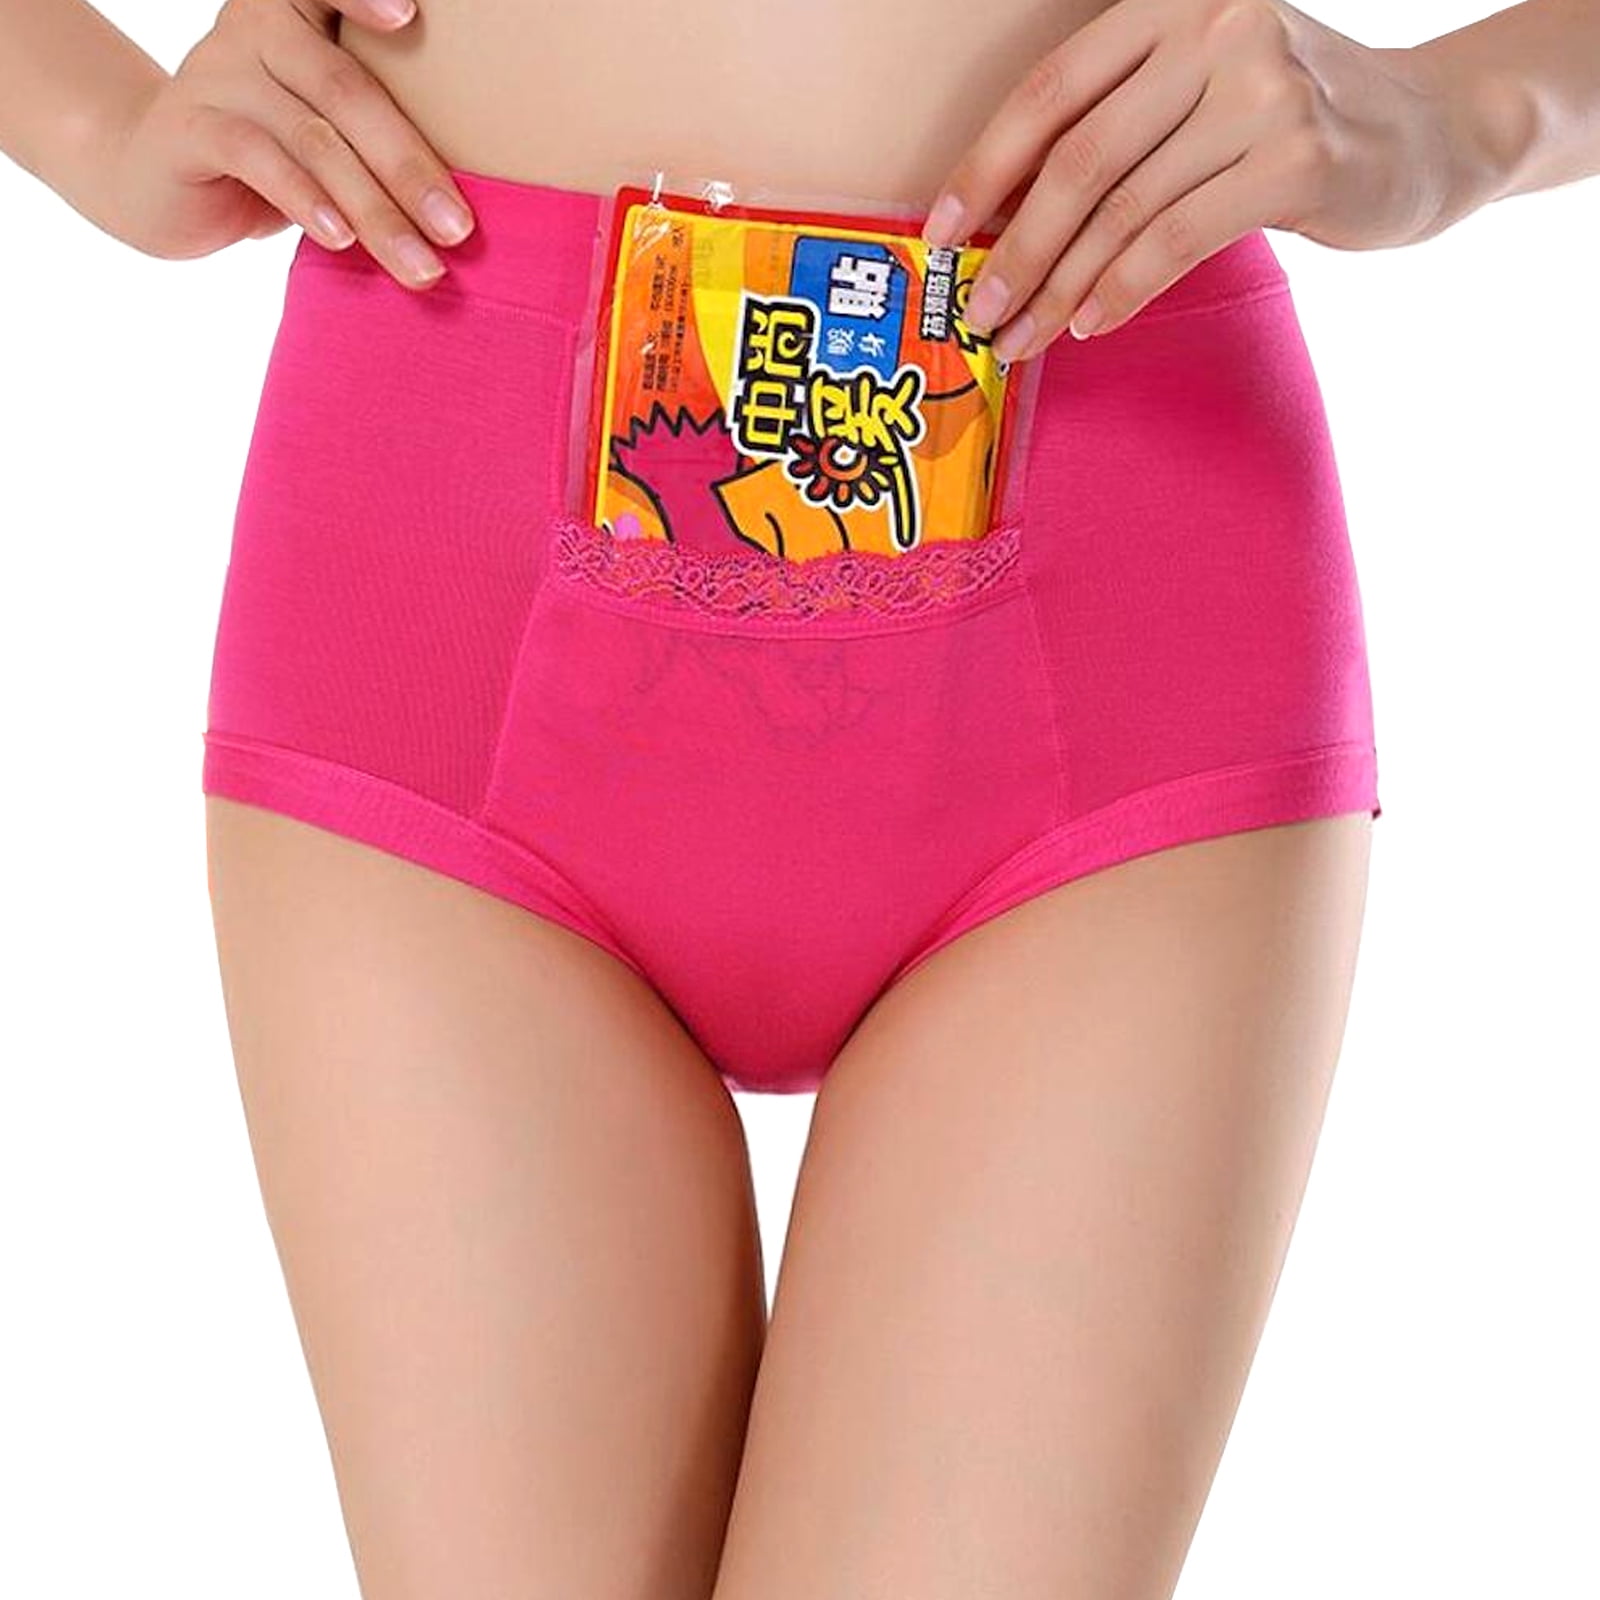 Code Red Menstrual Underwear for Women Period Panties with Pocket  Body-Defining Fit- Pink XXXL 